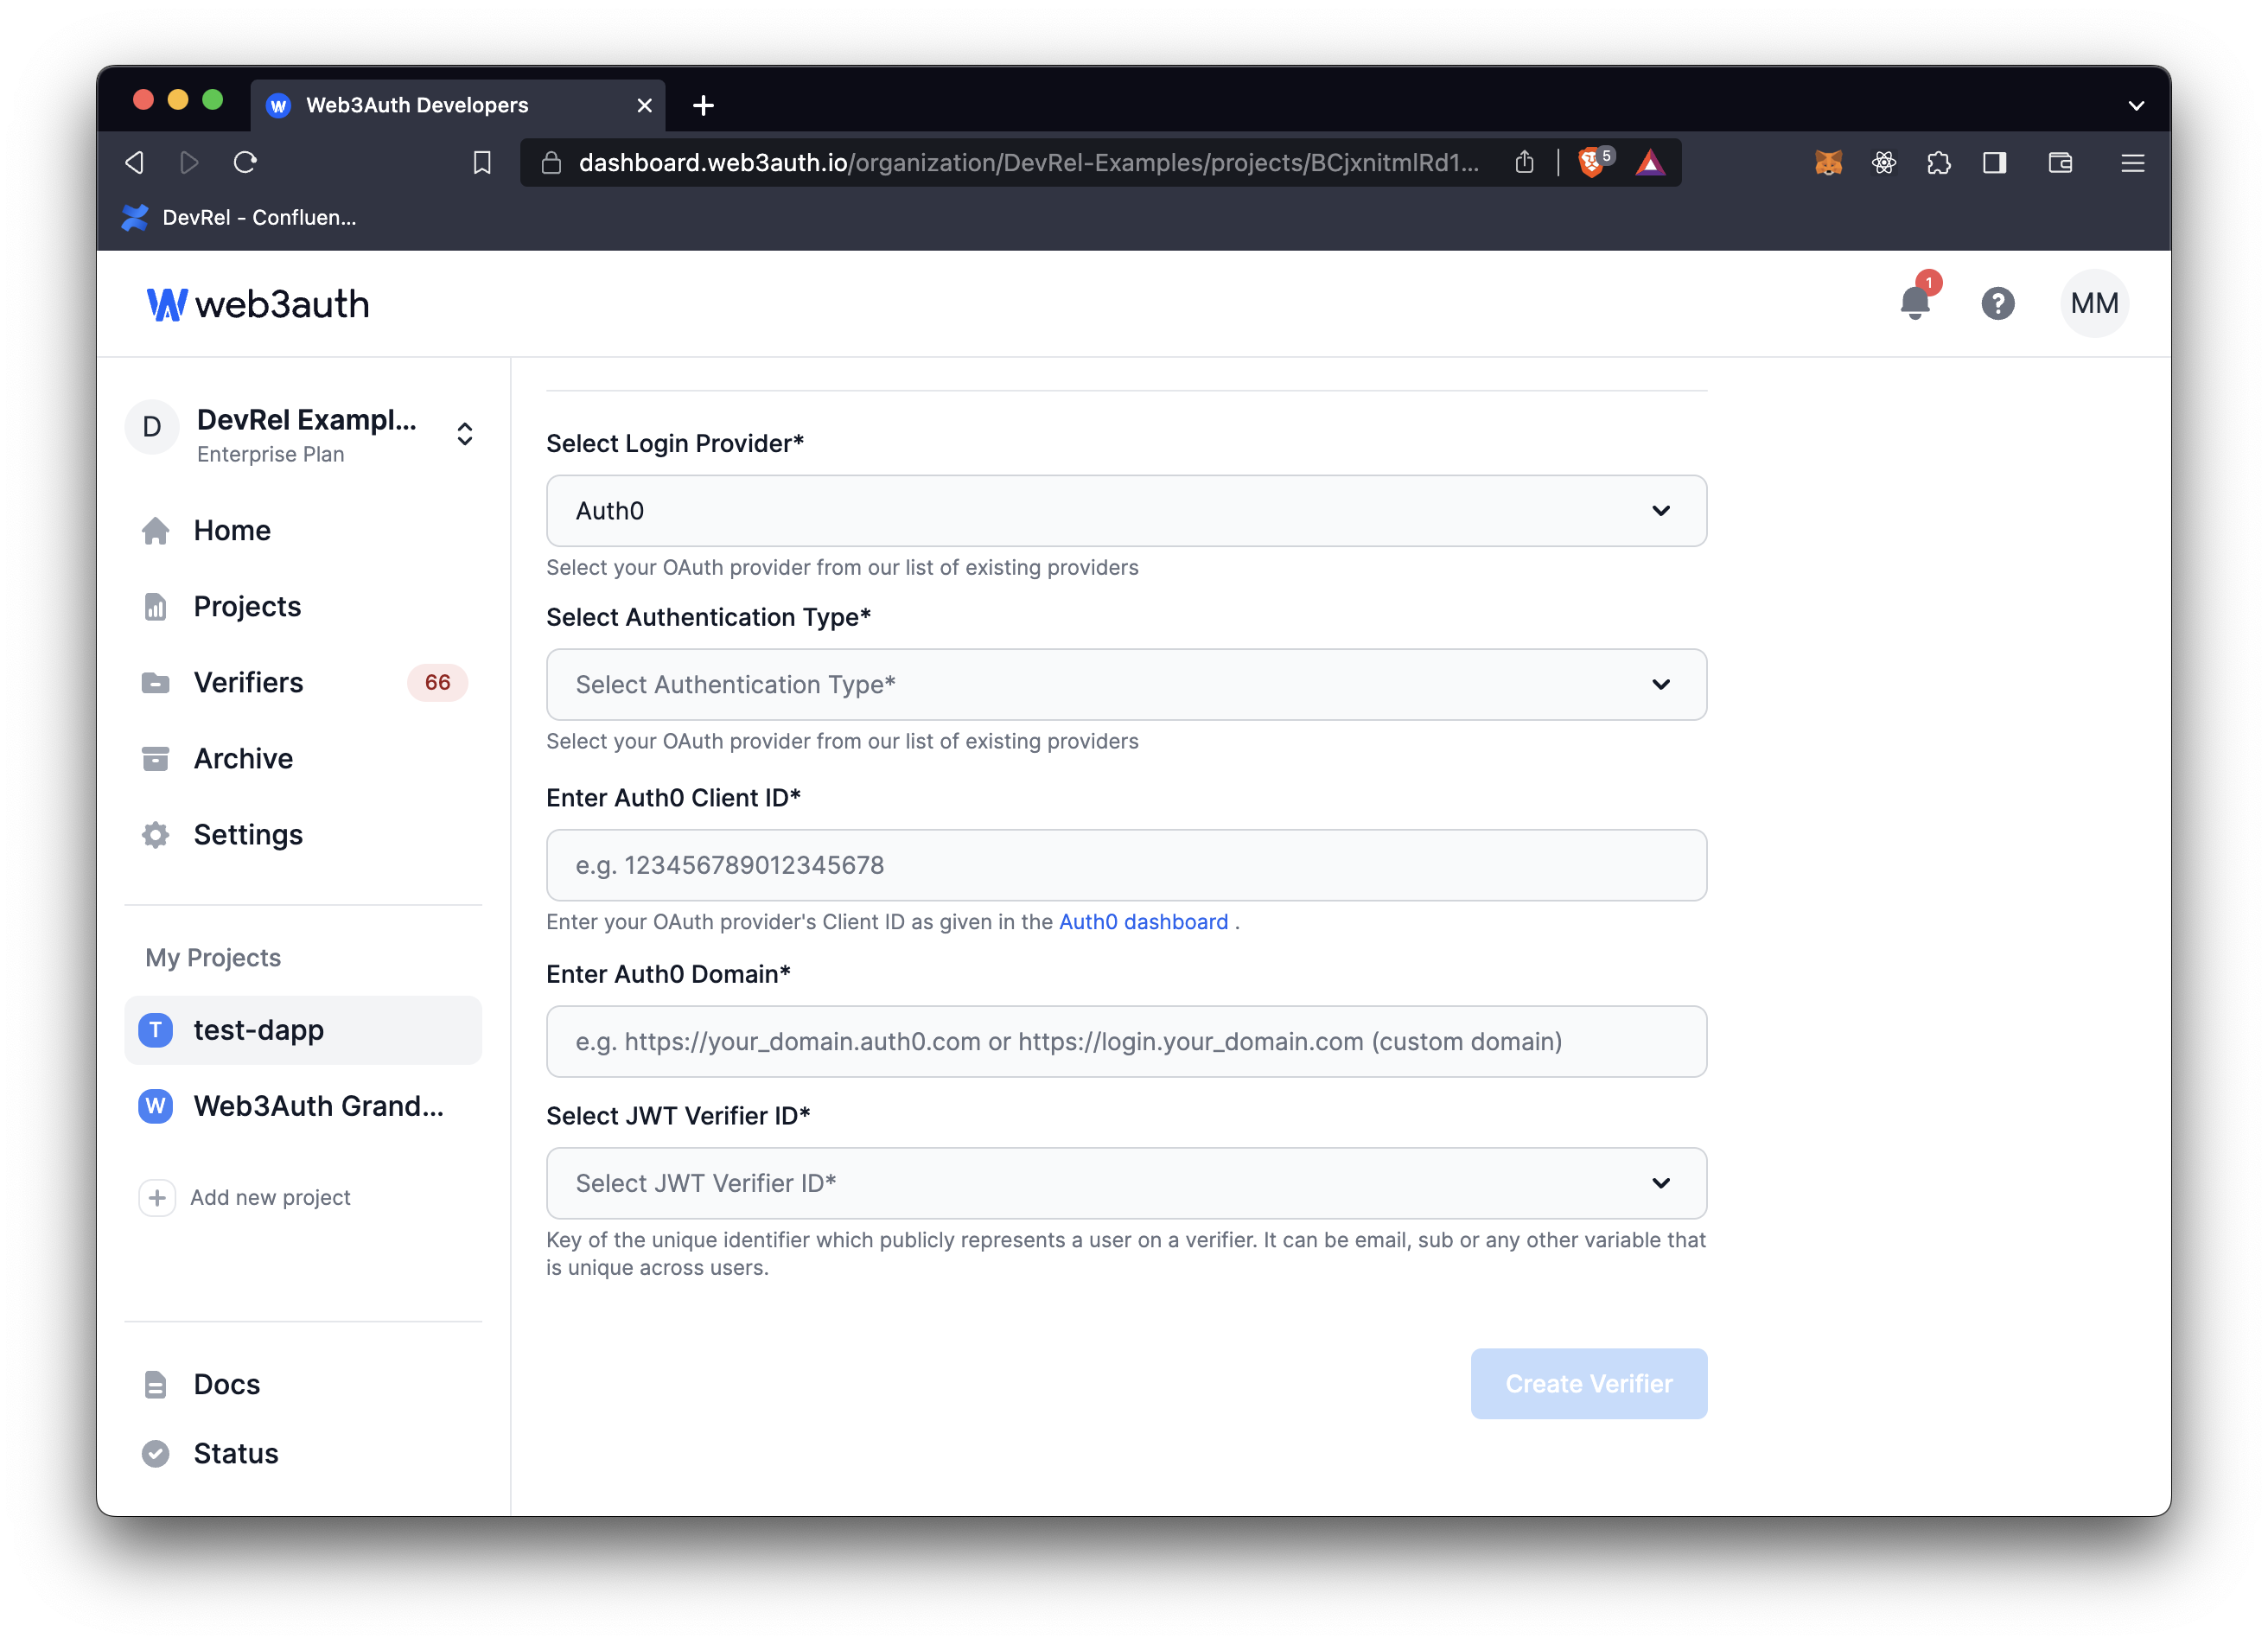 Facebook - Auth0 Client ID and Auth0 Domain on Web3Auth Dashboard